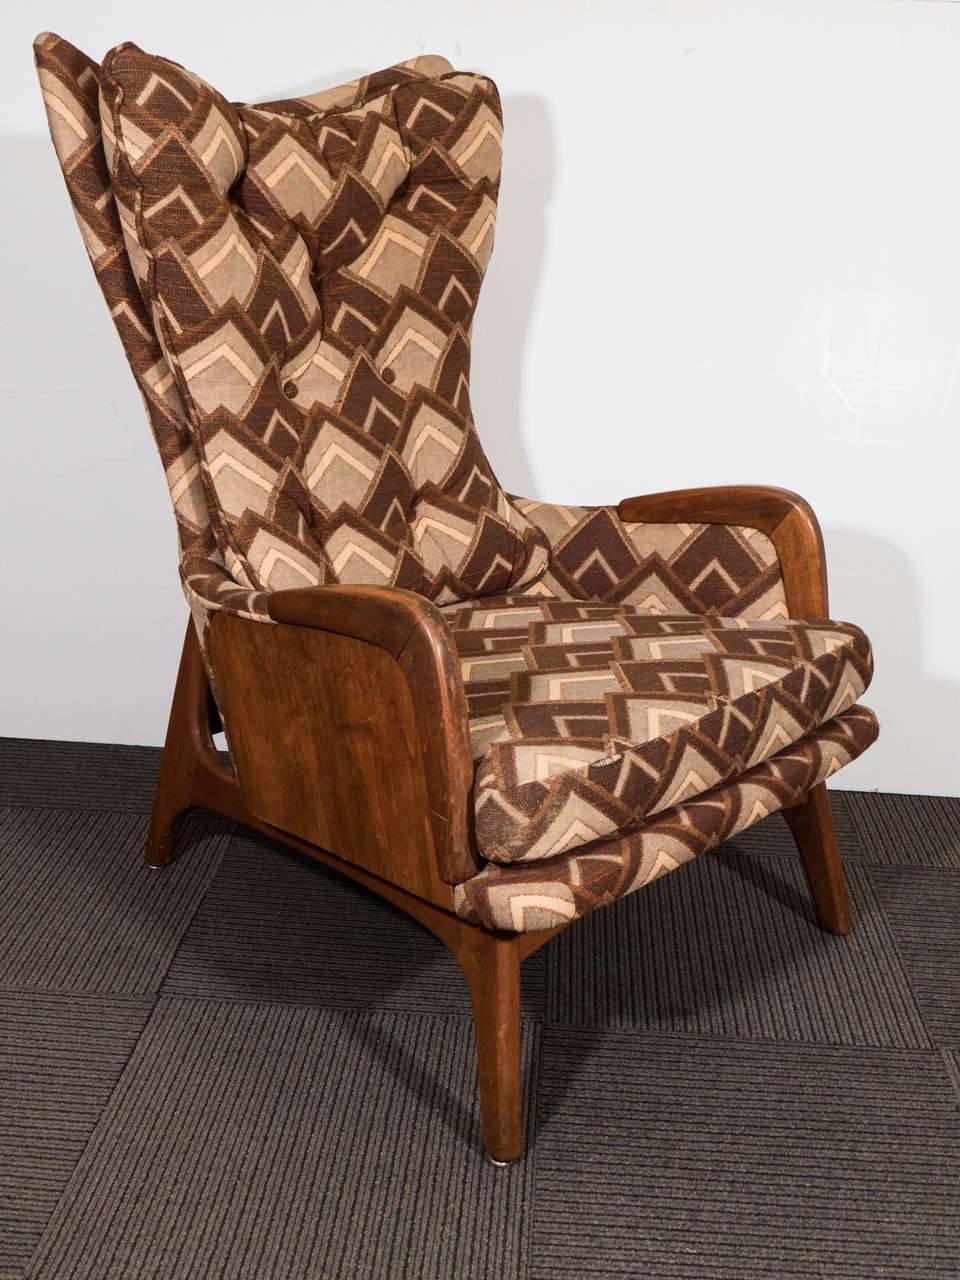 An amazing 1960s wingback lounge chair with button tufted geometric pattern upholstery by Adrian Pearsall.